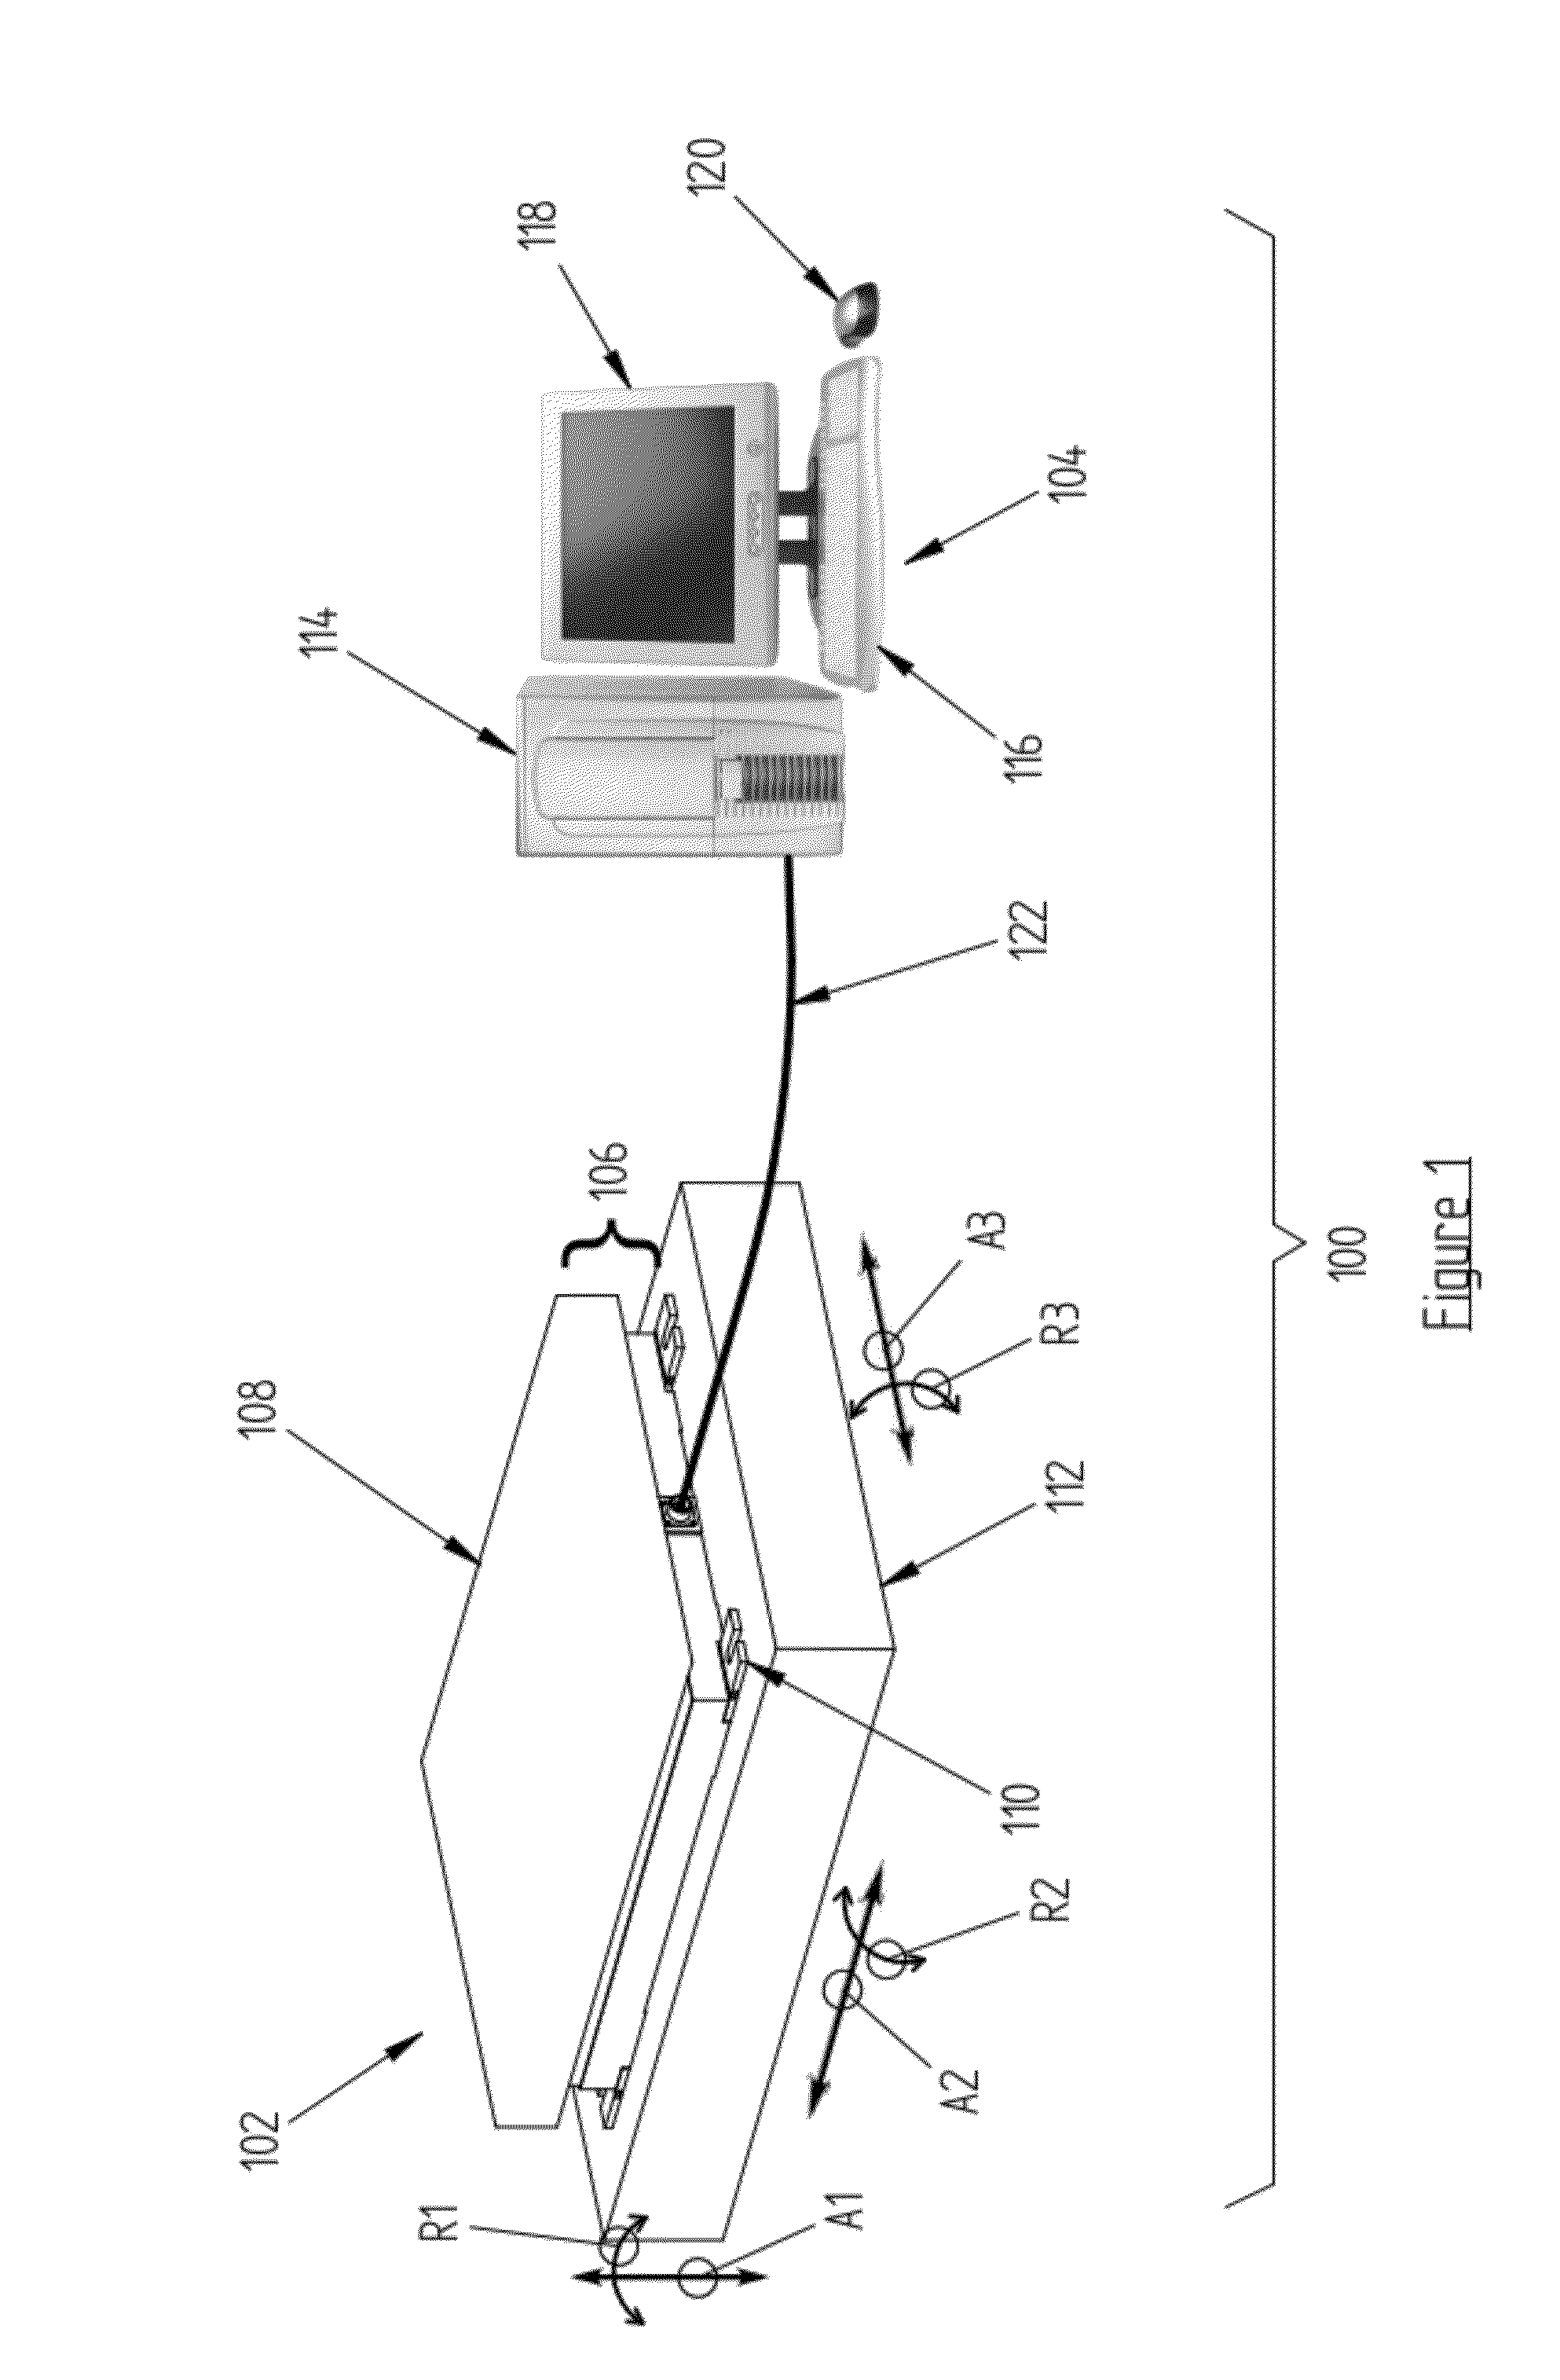 Force and/or motion measurement system having inertial compensation and method thereof